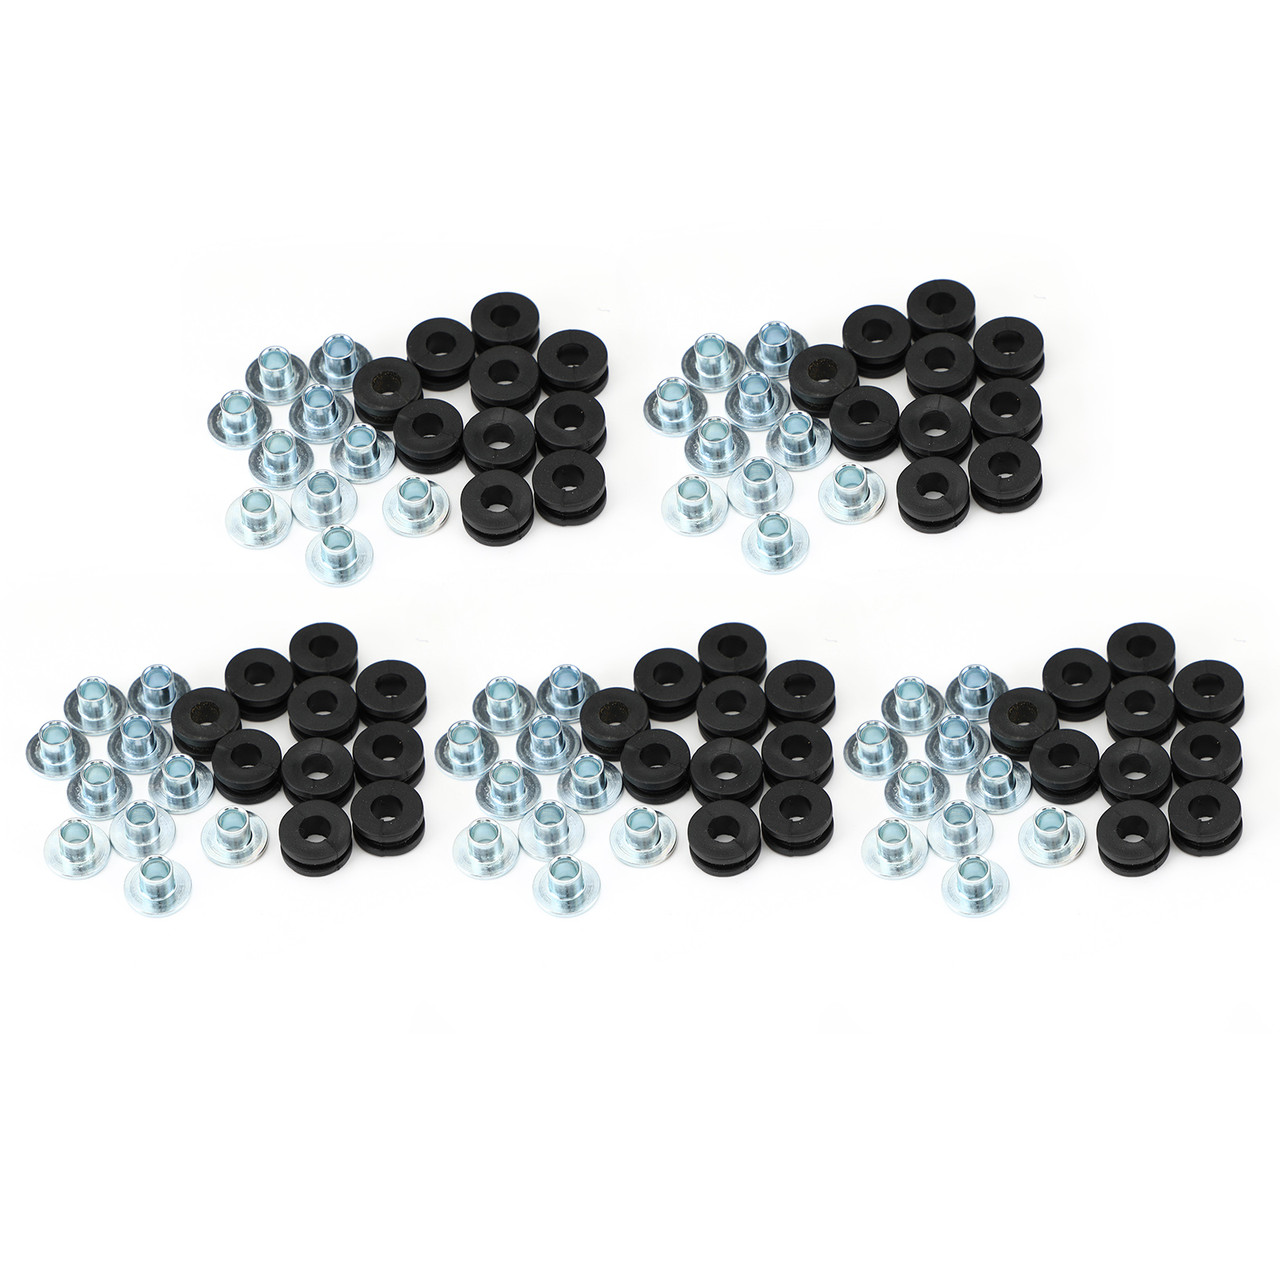 50 Pack M6 Motorcycle Side Panel Rubbers / Grommets Motorbike Kit Fit for Kawasaki